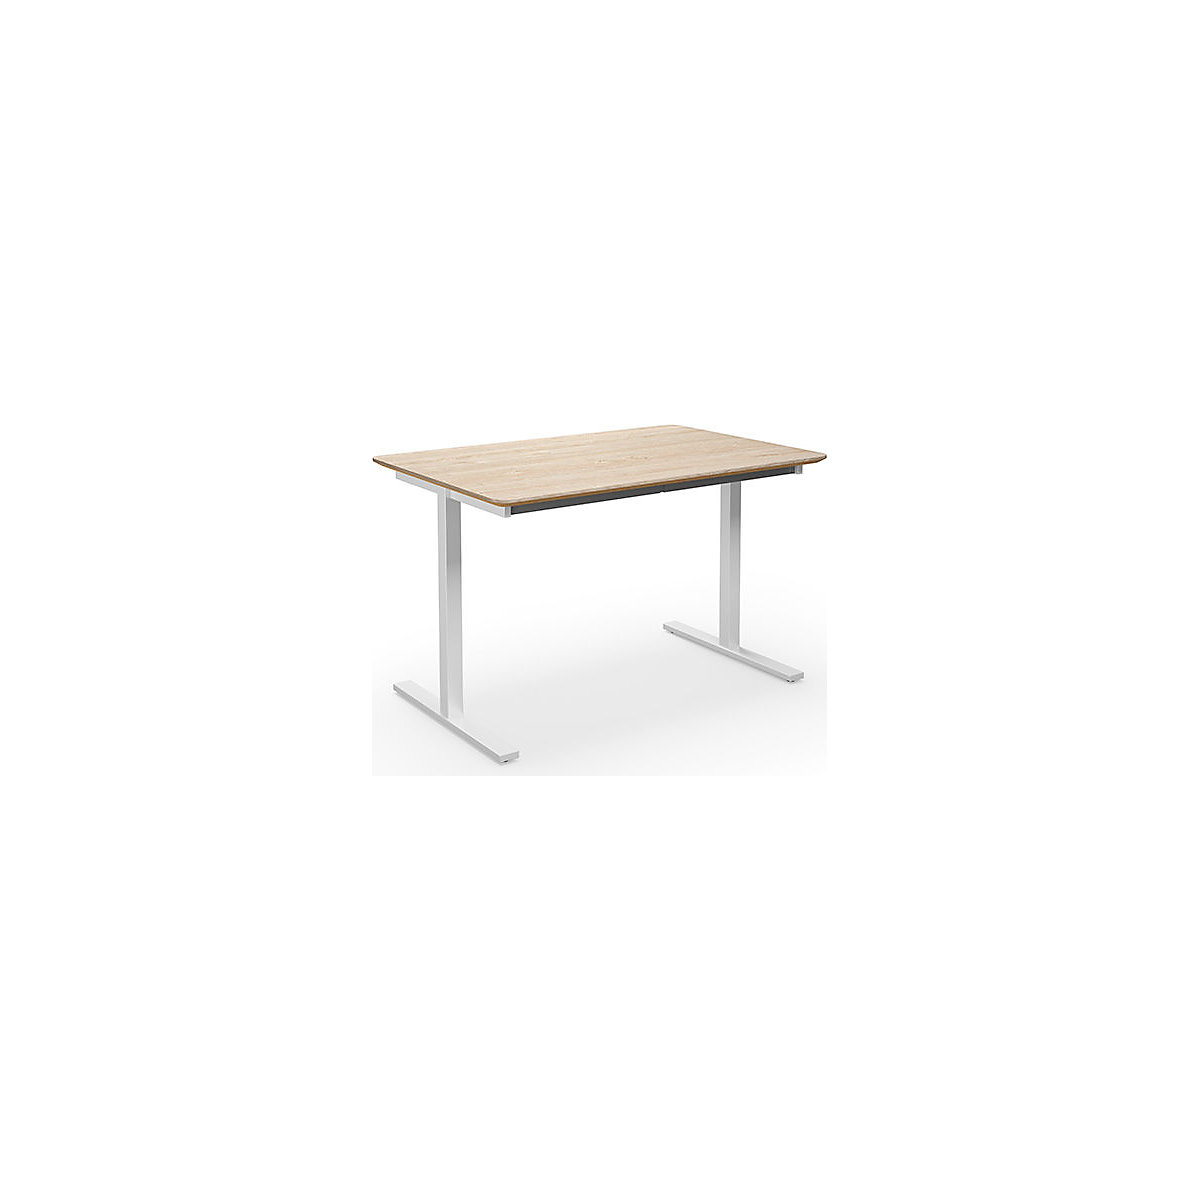 DUO-T Trend multi-purpose desk, straight tabletop, rounded corners, WxD 1200 x 800 mm, oak, white-3